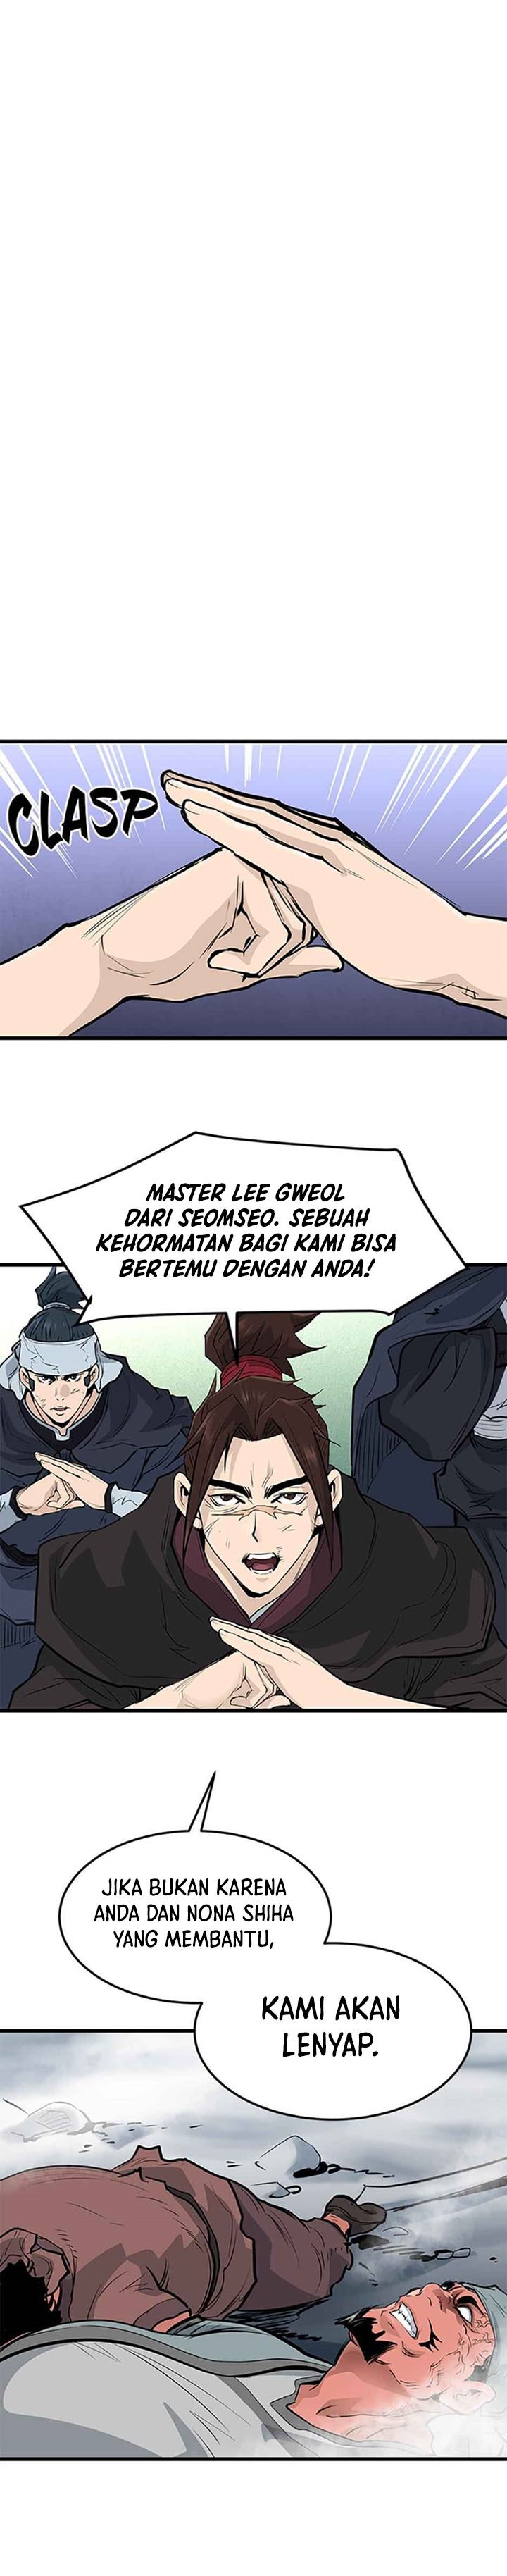 Grand General Chapter 52